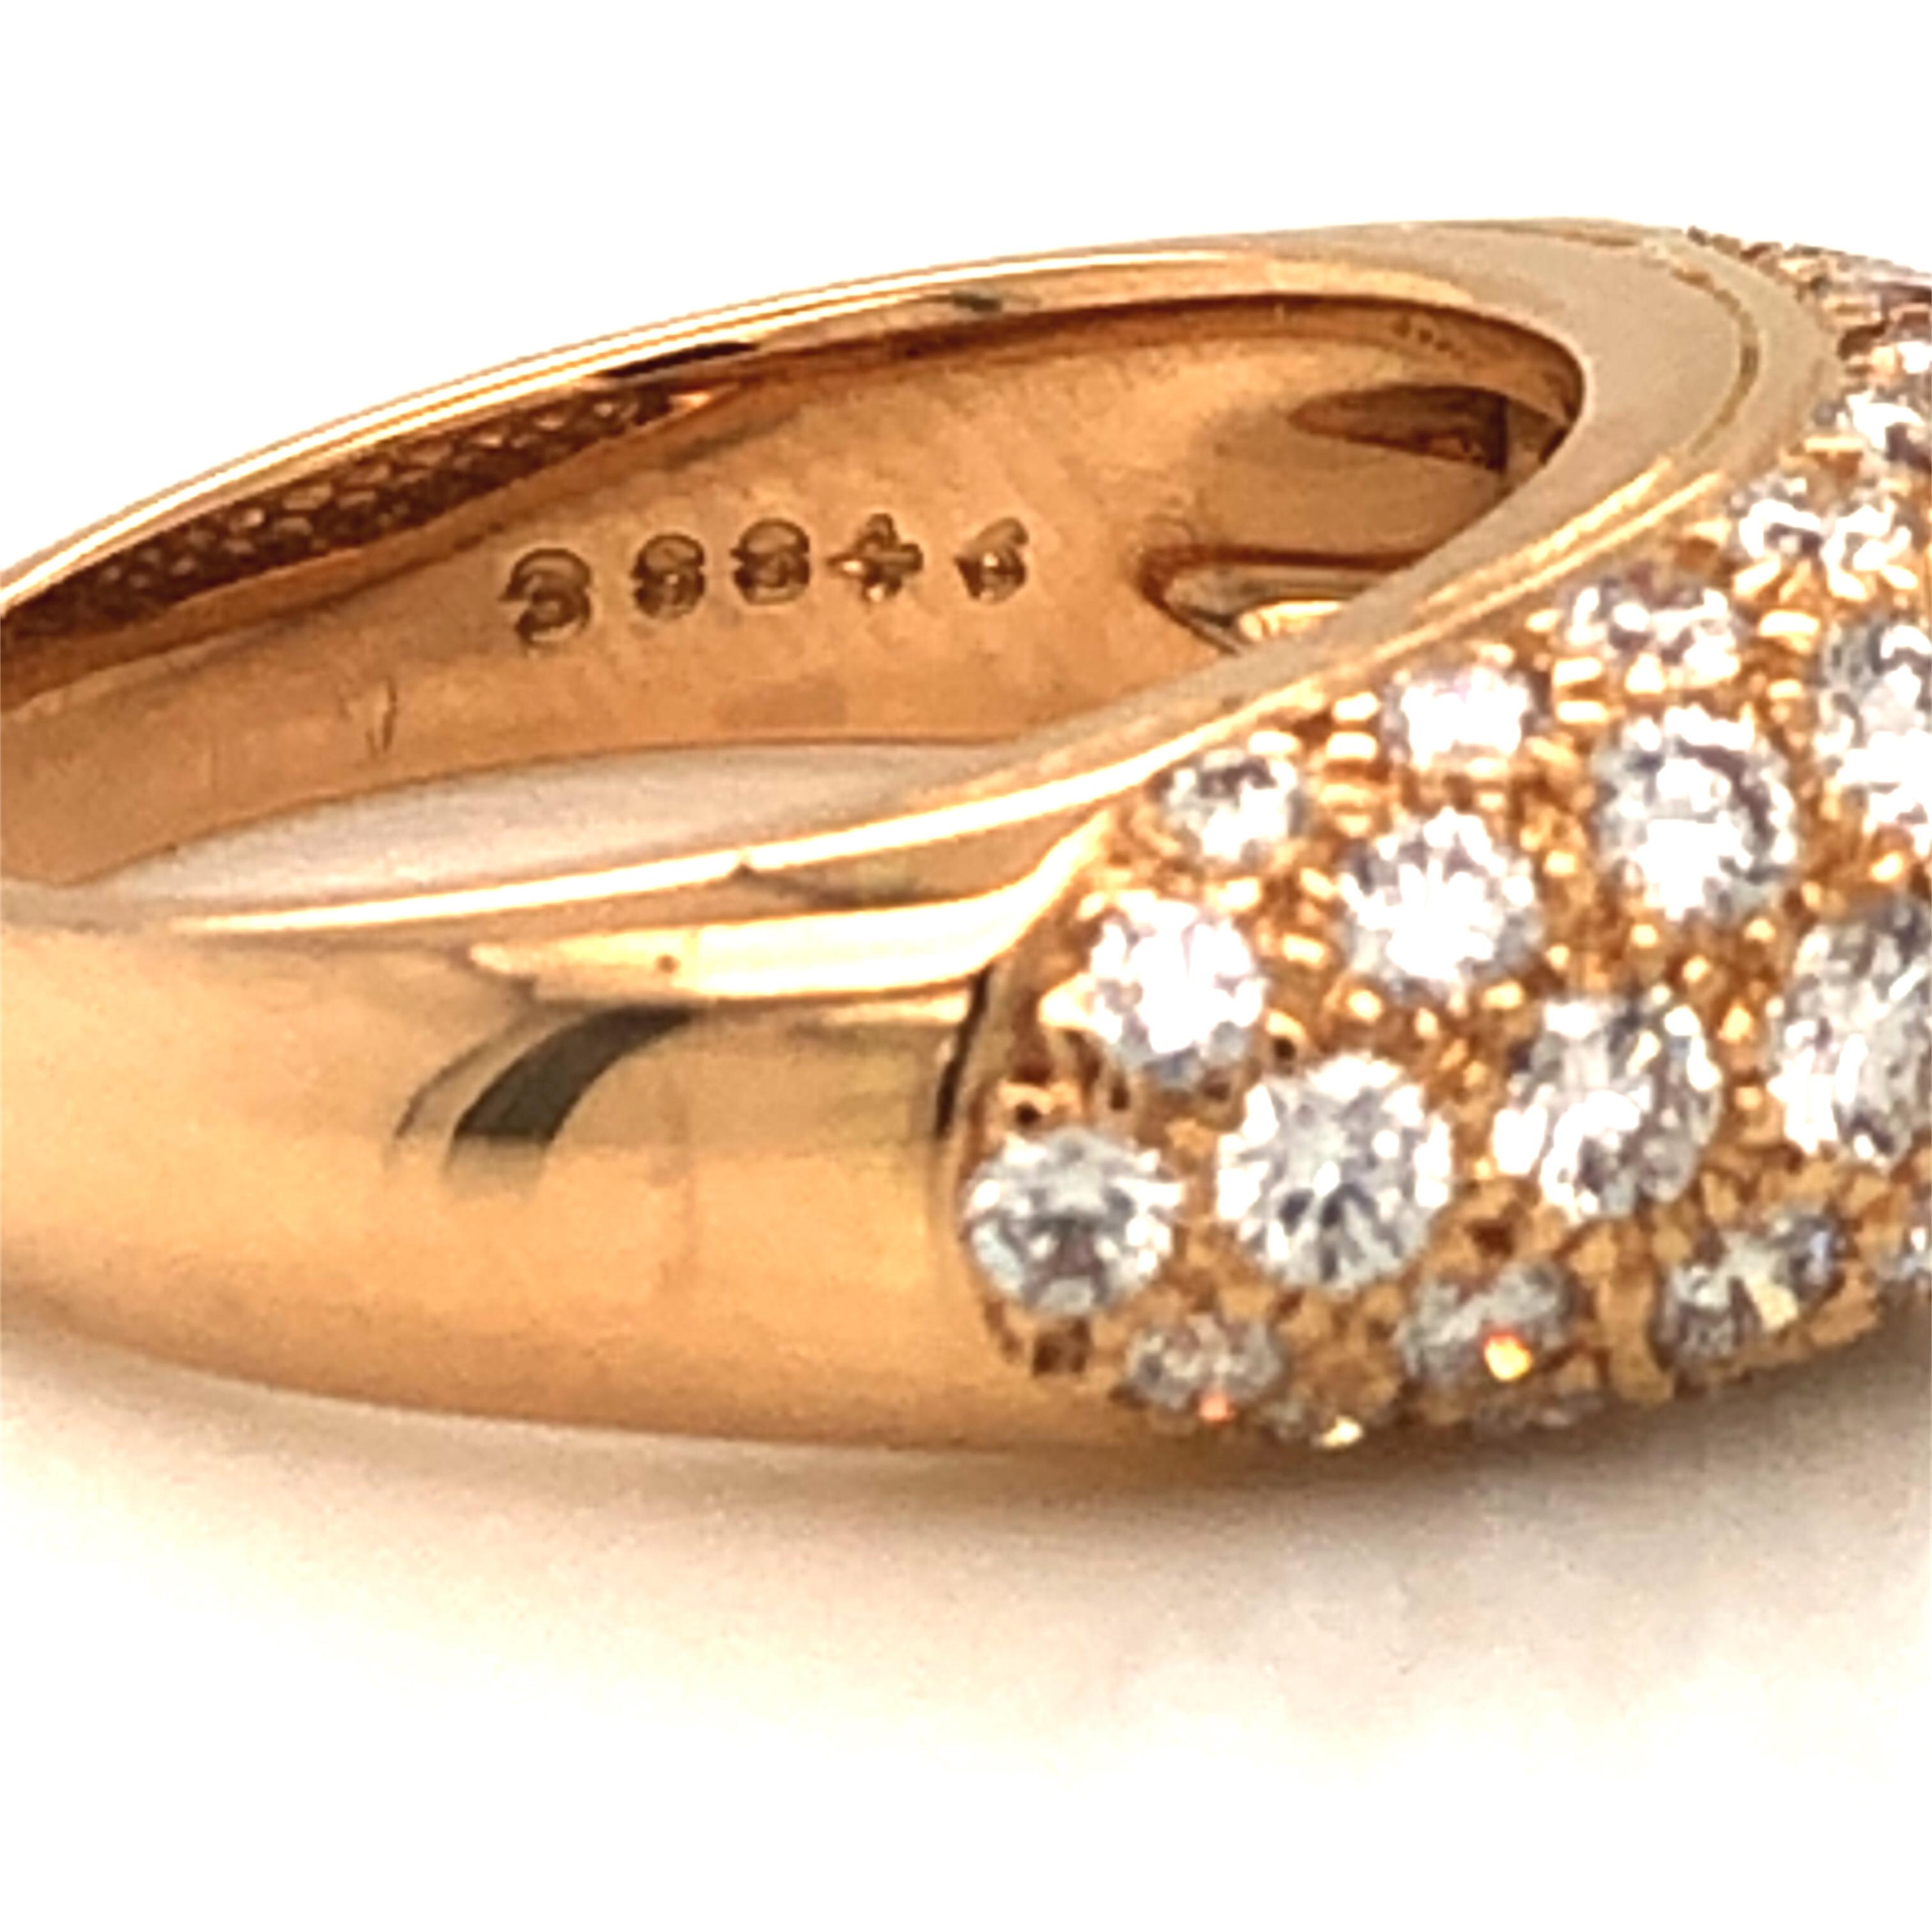 Oscar Heyman 18kt yellow gold dome ring contains 49 round diamonds weighing 1.84cts (F-G/VS) that are bead set. It is stamped with the makers mark, 18K, and serial number 38846. Dome height is 6.5mm. This is a beautiful classic design that pops on